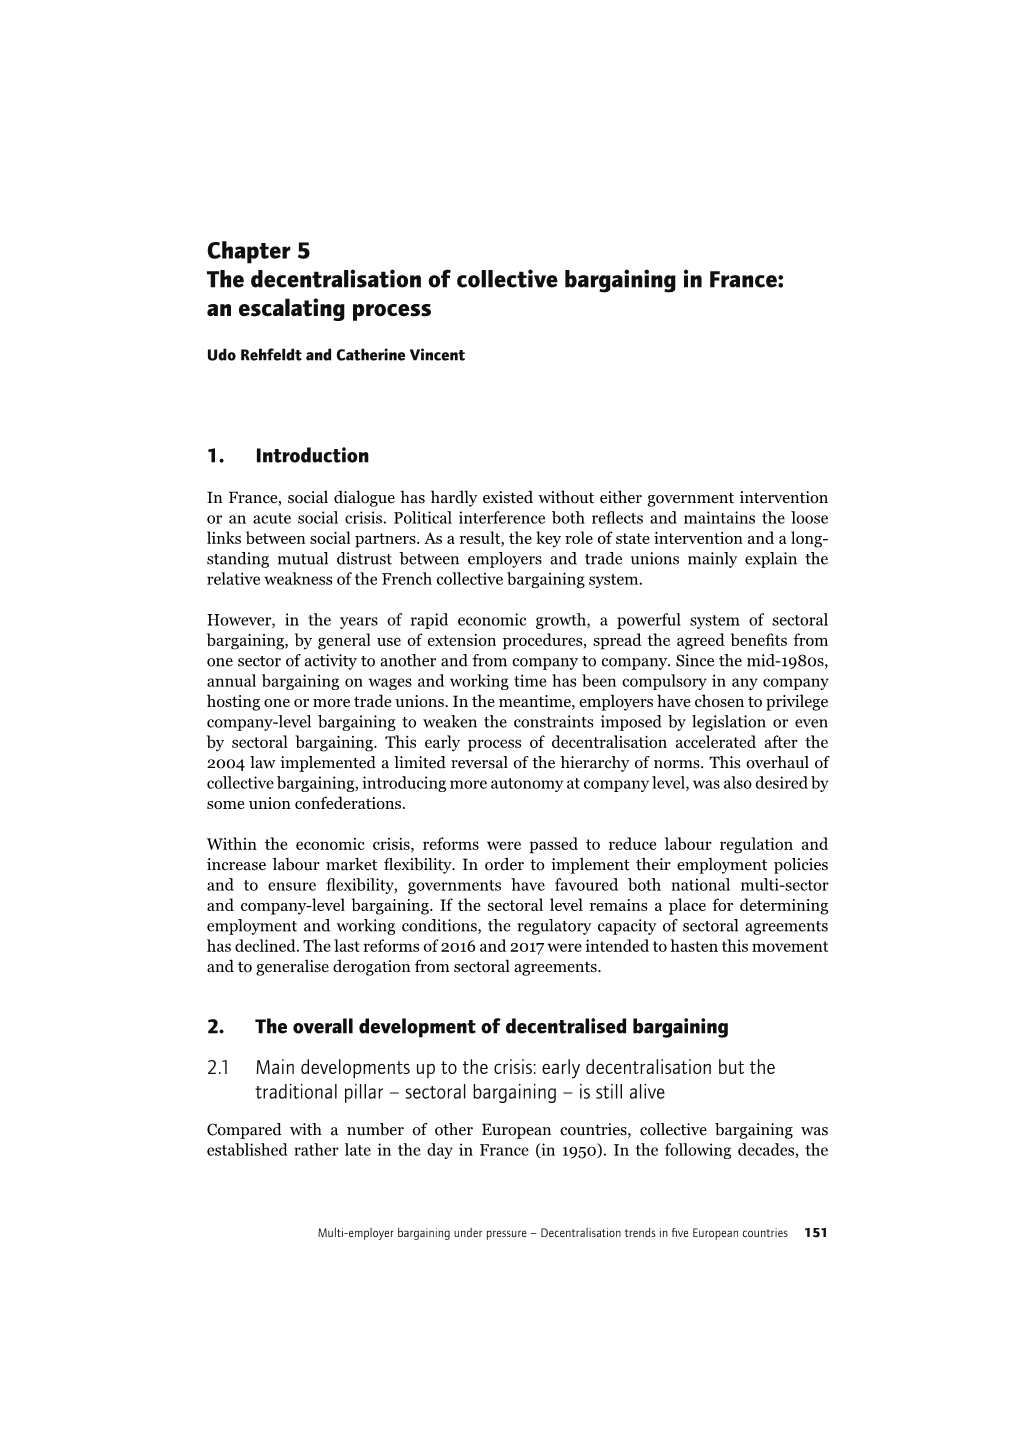 Chapter 5 the Decentralisation of Collective Bargaining in France: an Escalating Process